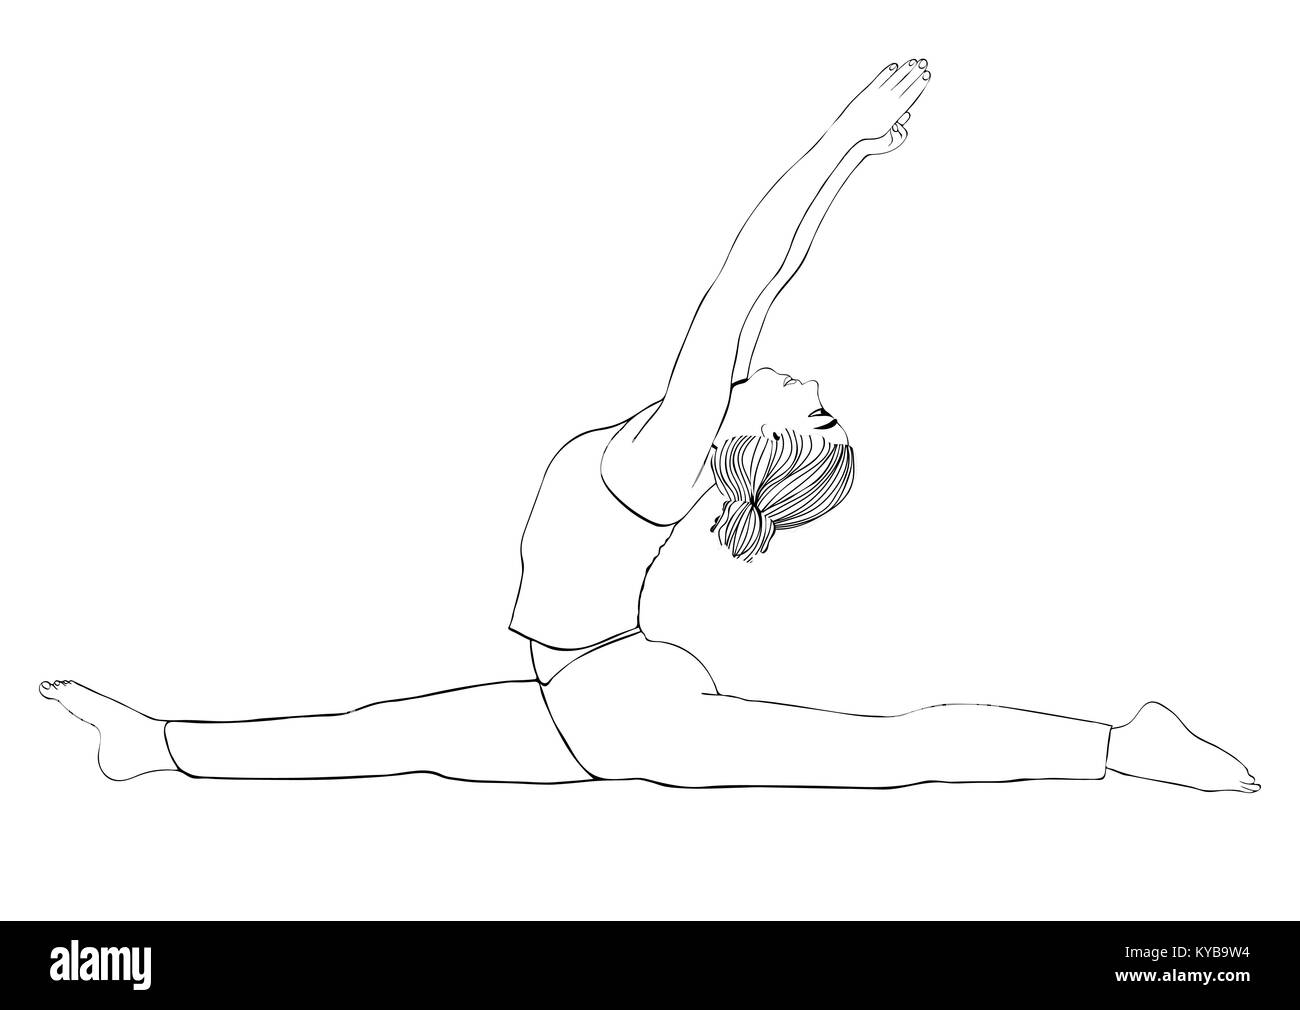 Yoga Poses Line Drawing Stock Illustrations – 267 Yoga Poses Line Drawing  Stock Illustrations, Vectors & Clipart - Dreamstime